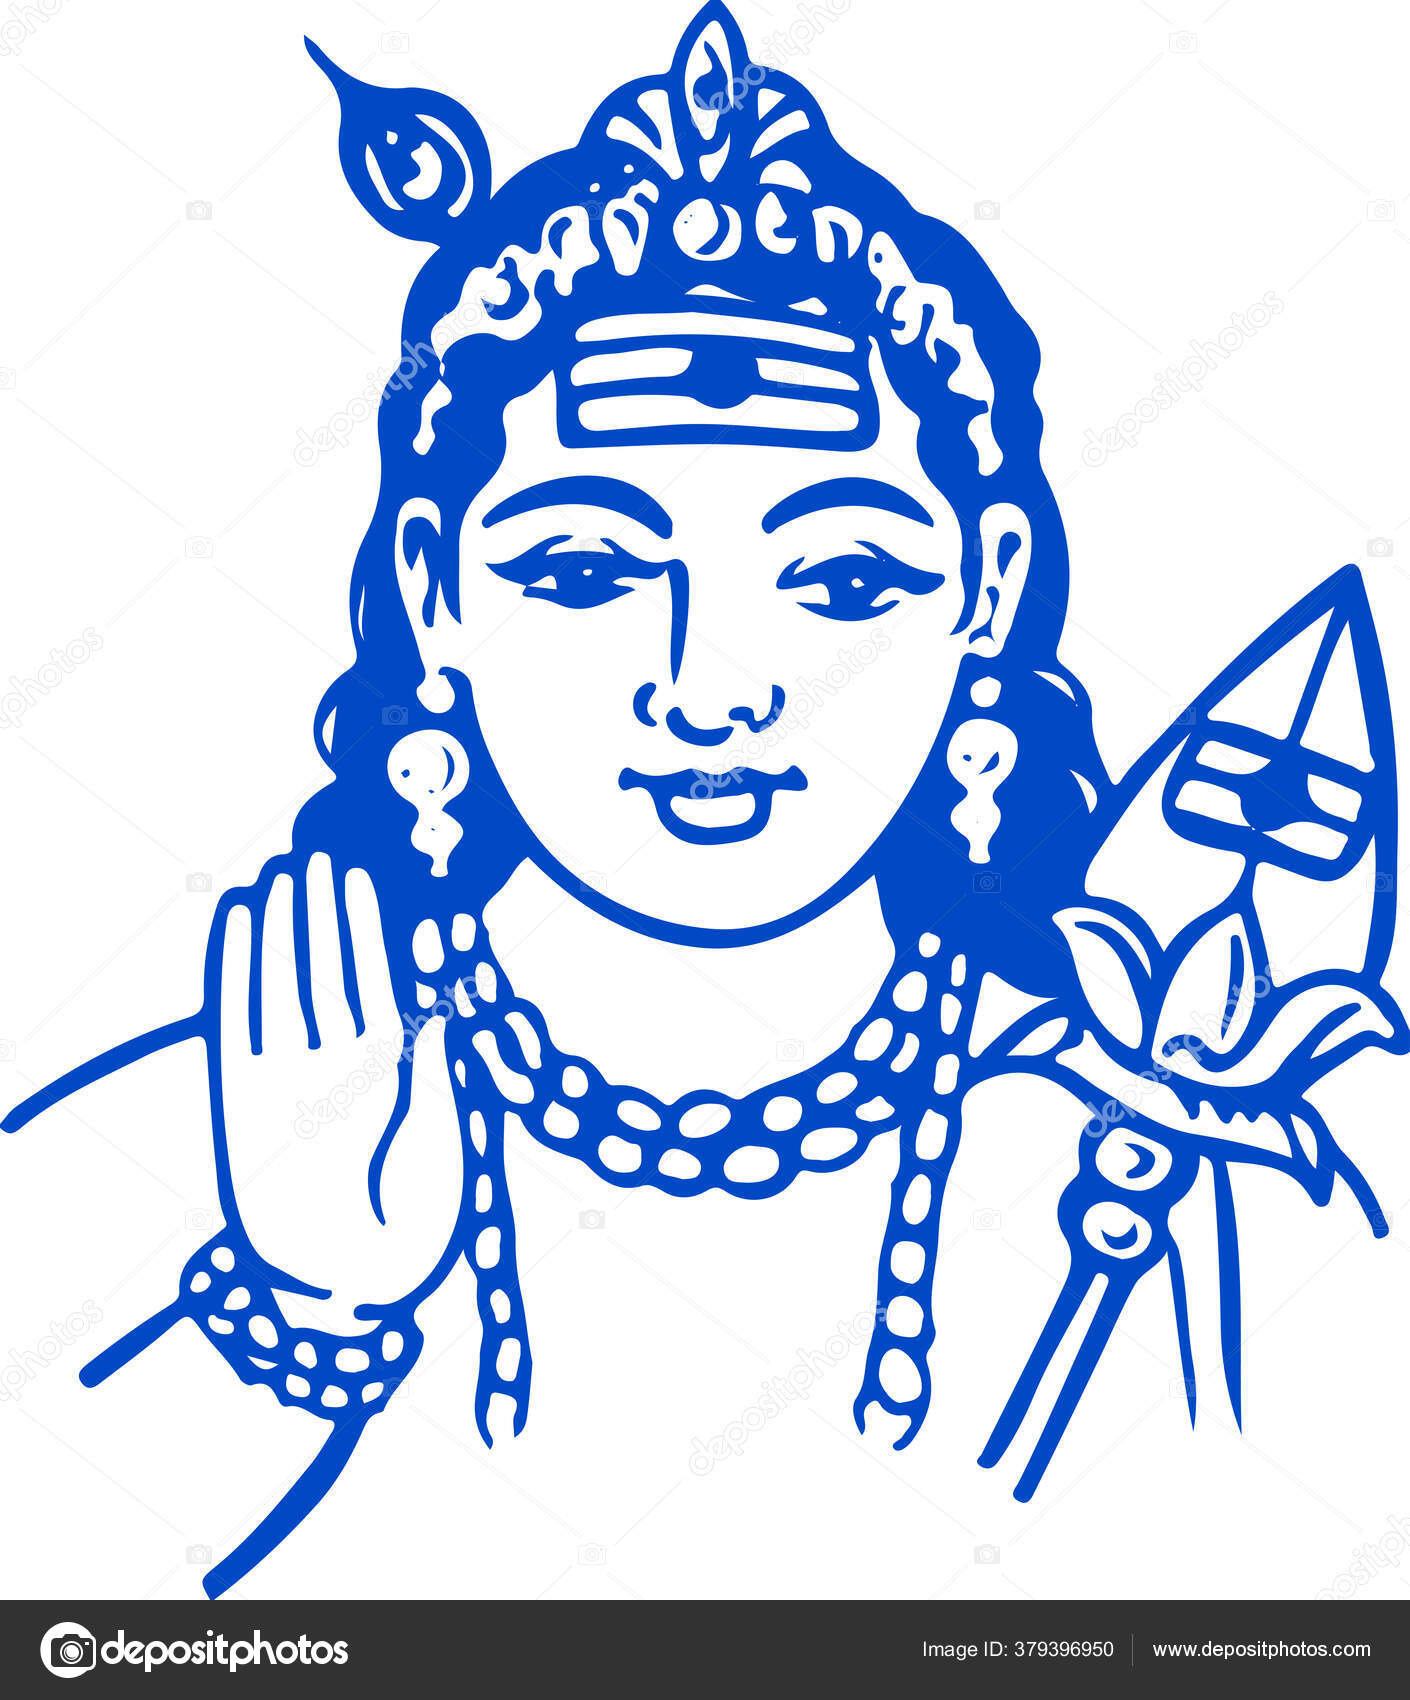 Lord Aiyappa | Pencil drawing images, Easy love drawings, Art painting tools